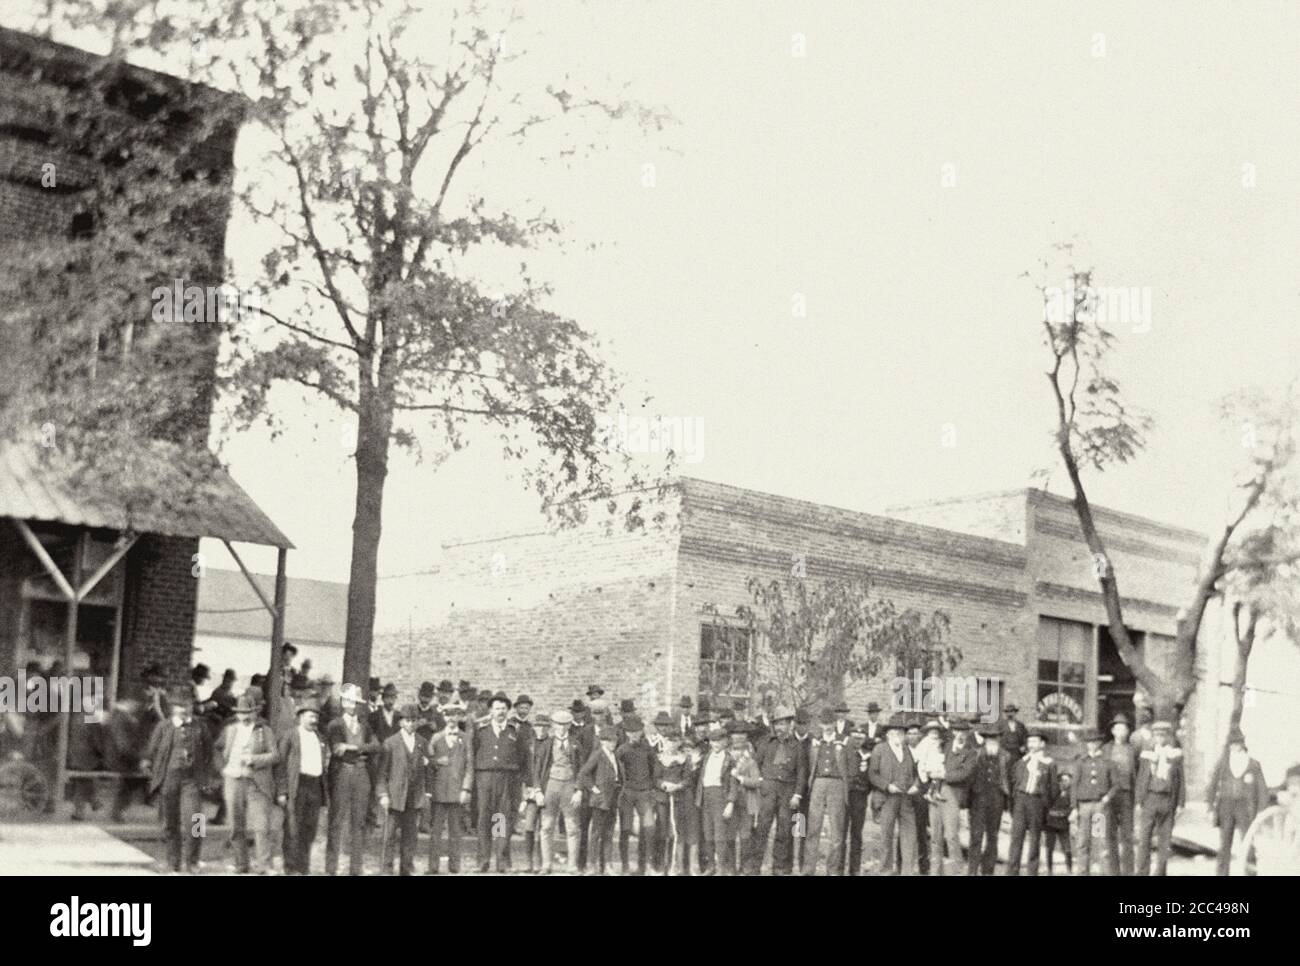 The Wilmington insurrection of 1898, also known as the Wilmington massacre of 1898 or the Wilmington coup of 1898, occurred in Wilmington, North Carol Stock Photo